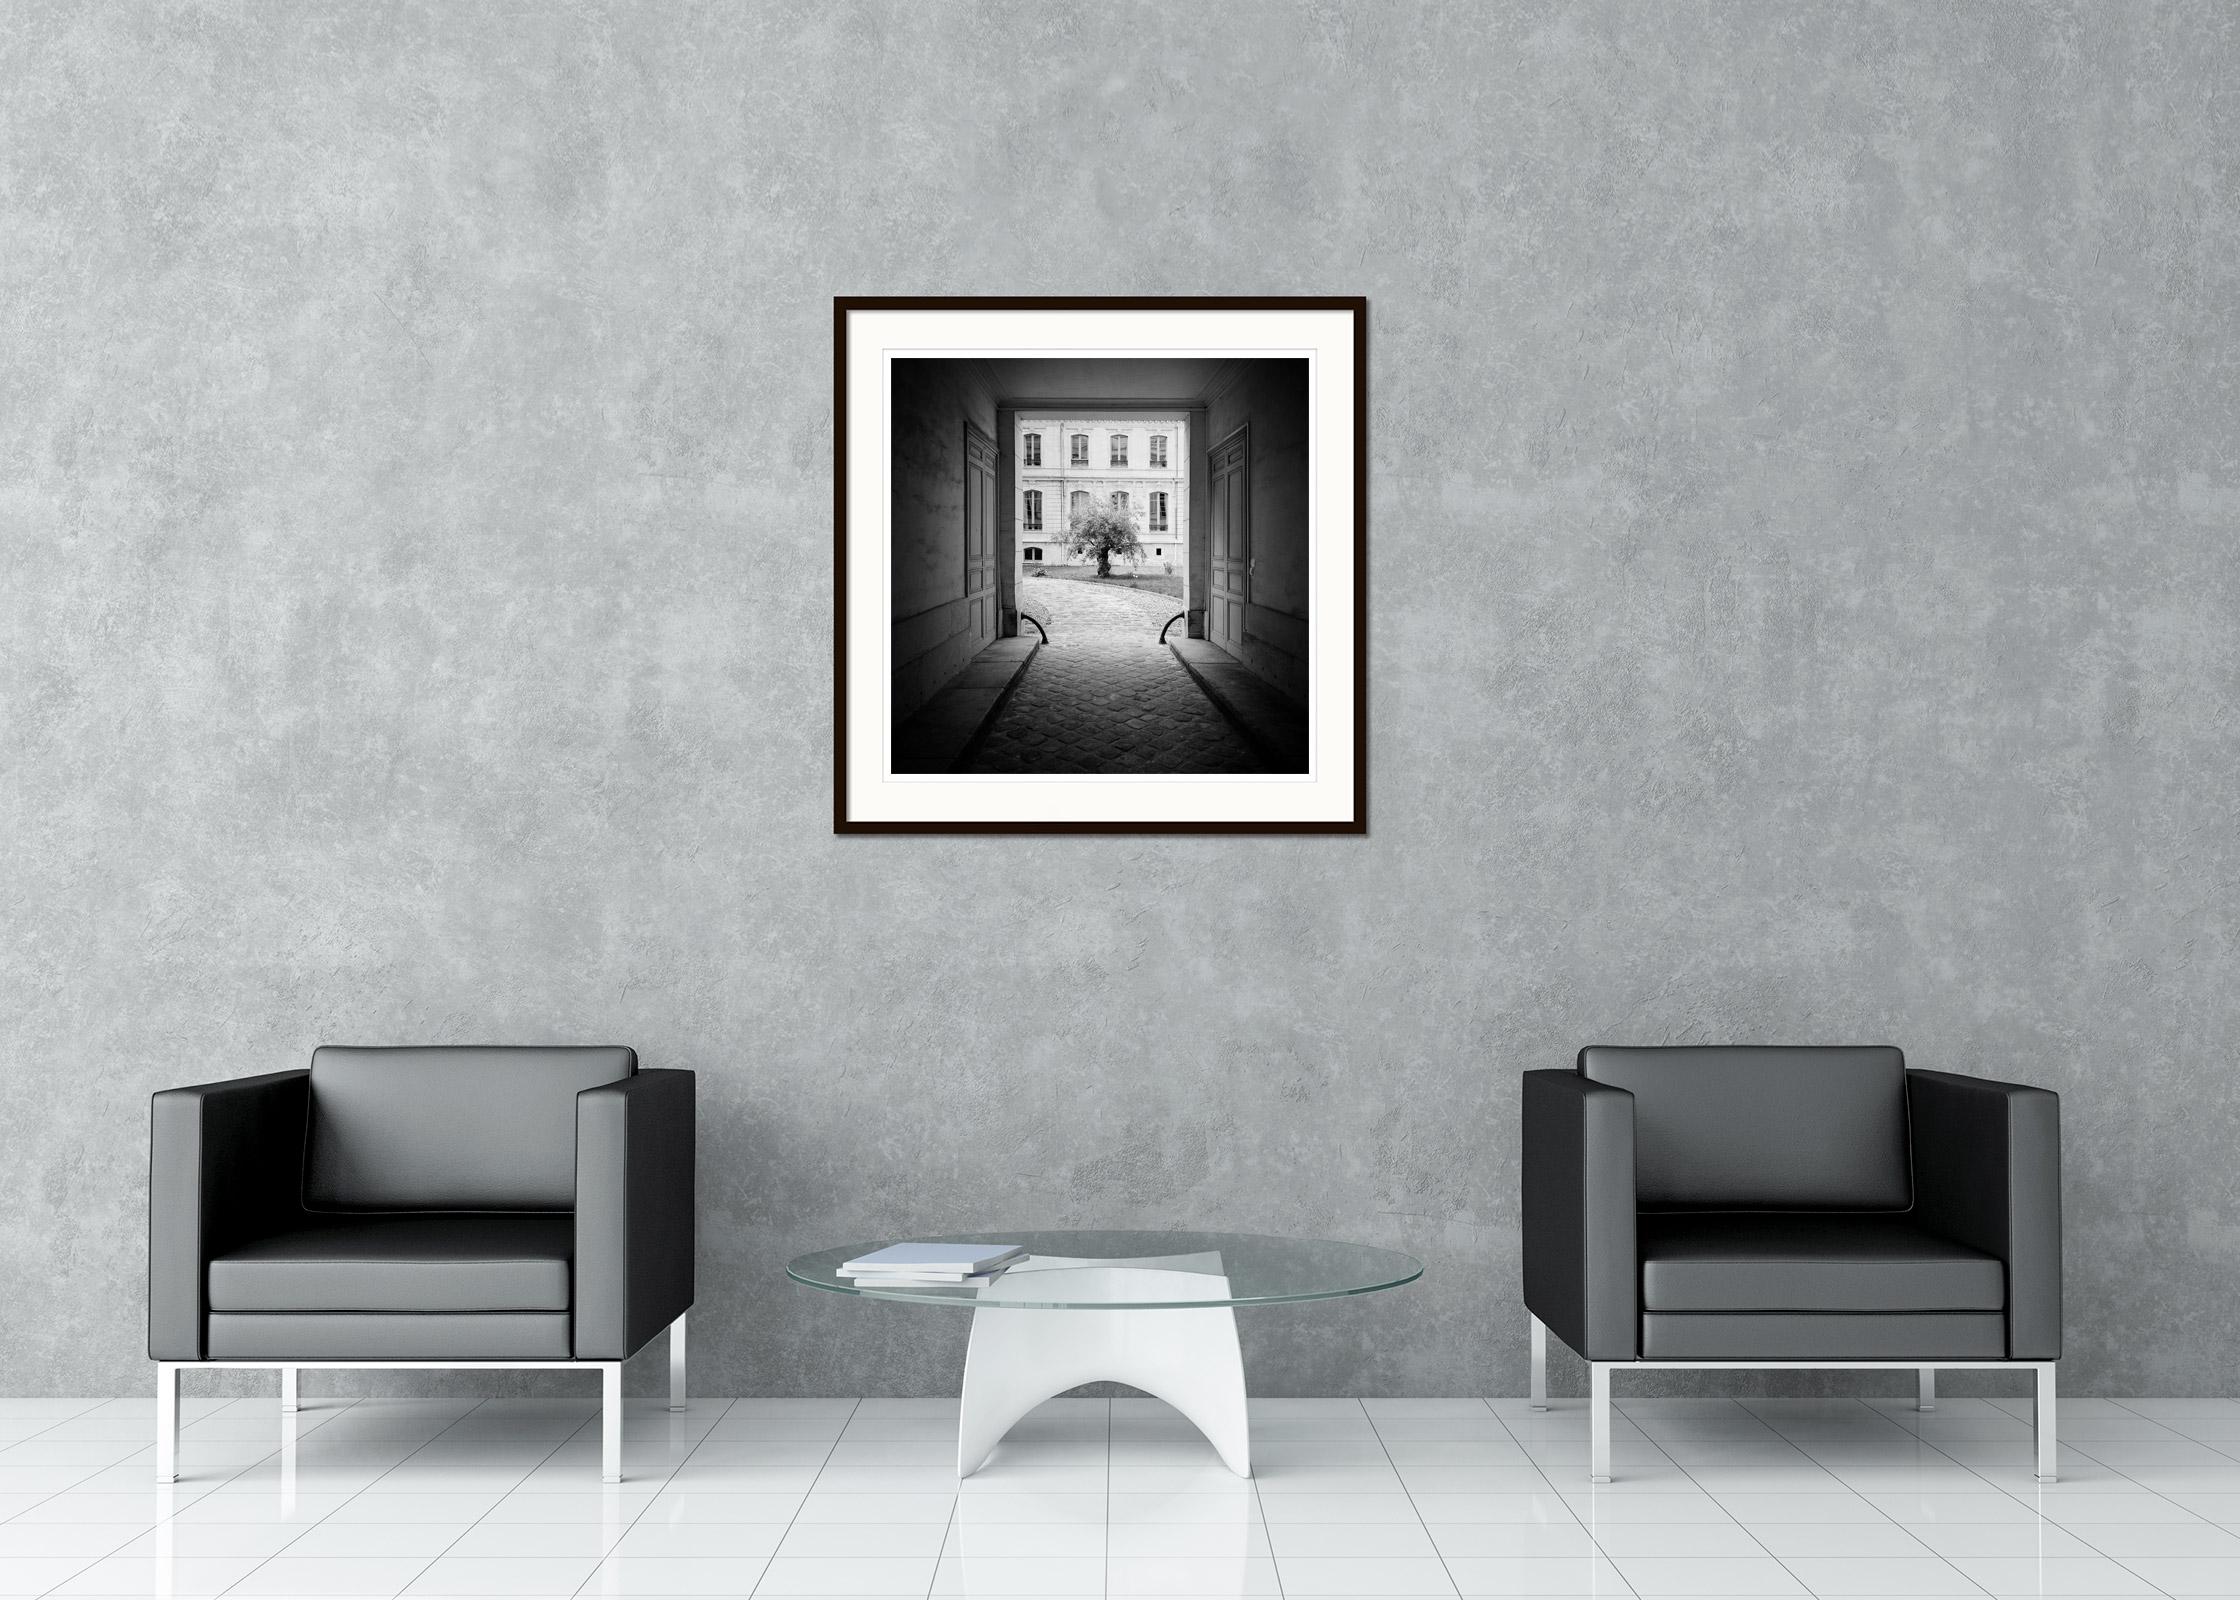 Black and White Fine Art cityscape photography. Archival pigment ink print, edition of 7. Signed, titled, dated and numbered by artist. Certificate of authenticity included. Printed with 4cm white border. International award winner photographer -